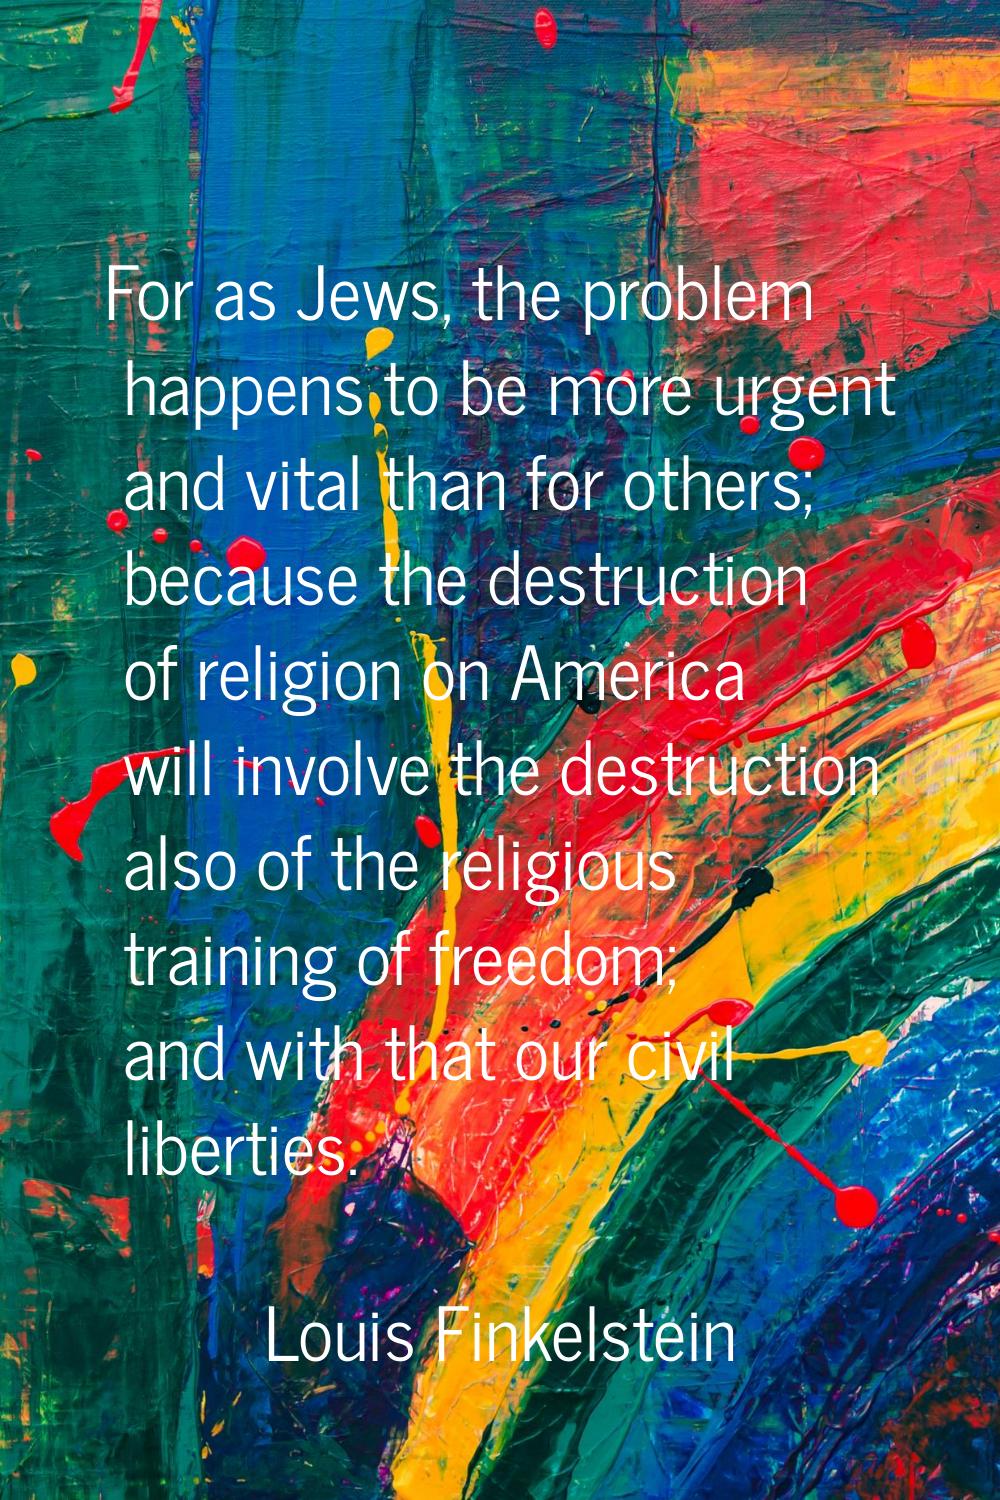 For as Jews, the problem happens to be more urgent and vital than for others; because the destructi